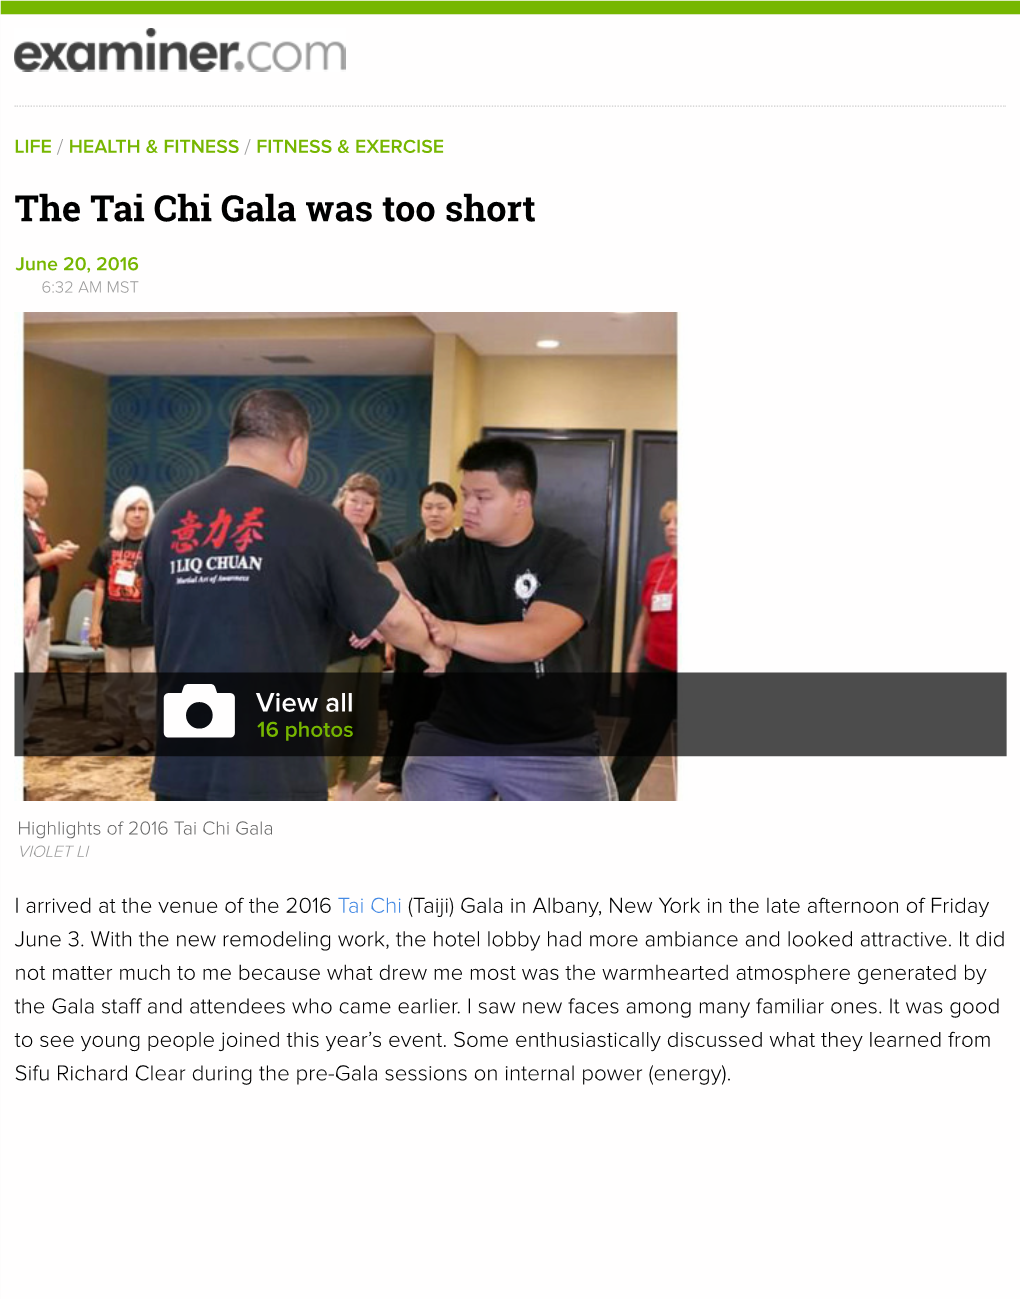 The Tai Chi Gala Was Too Short